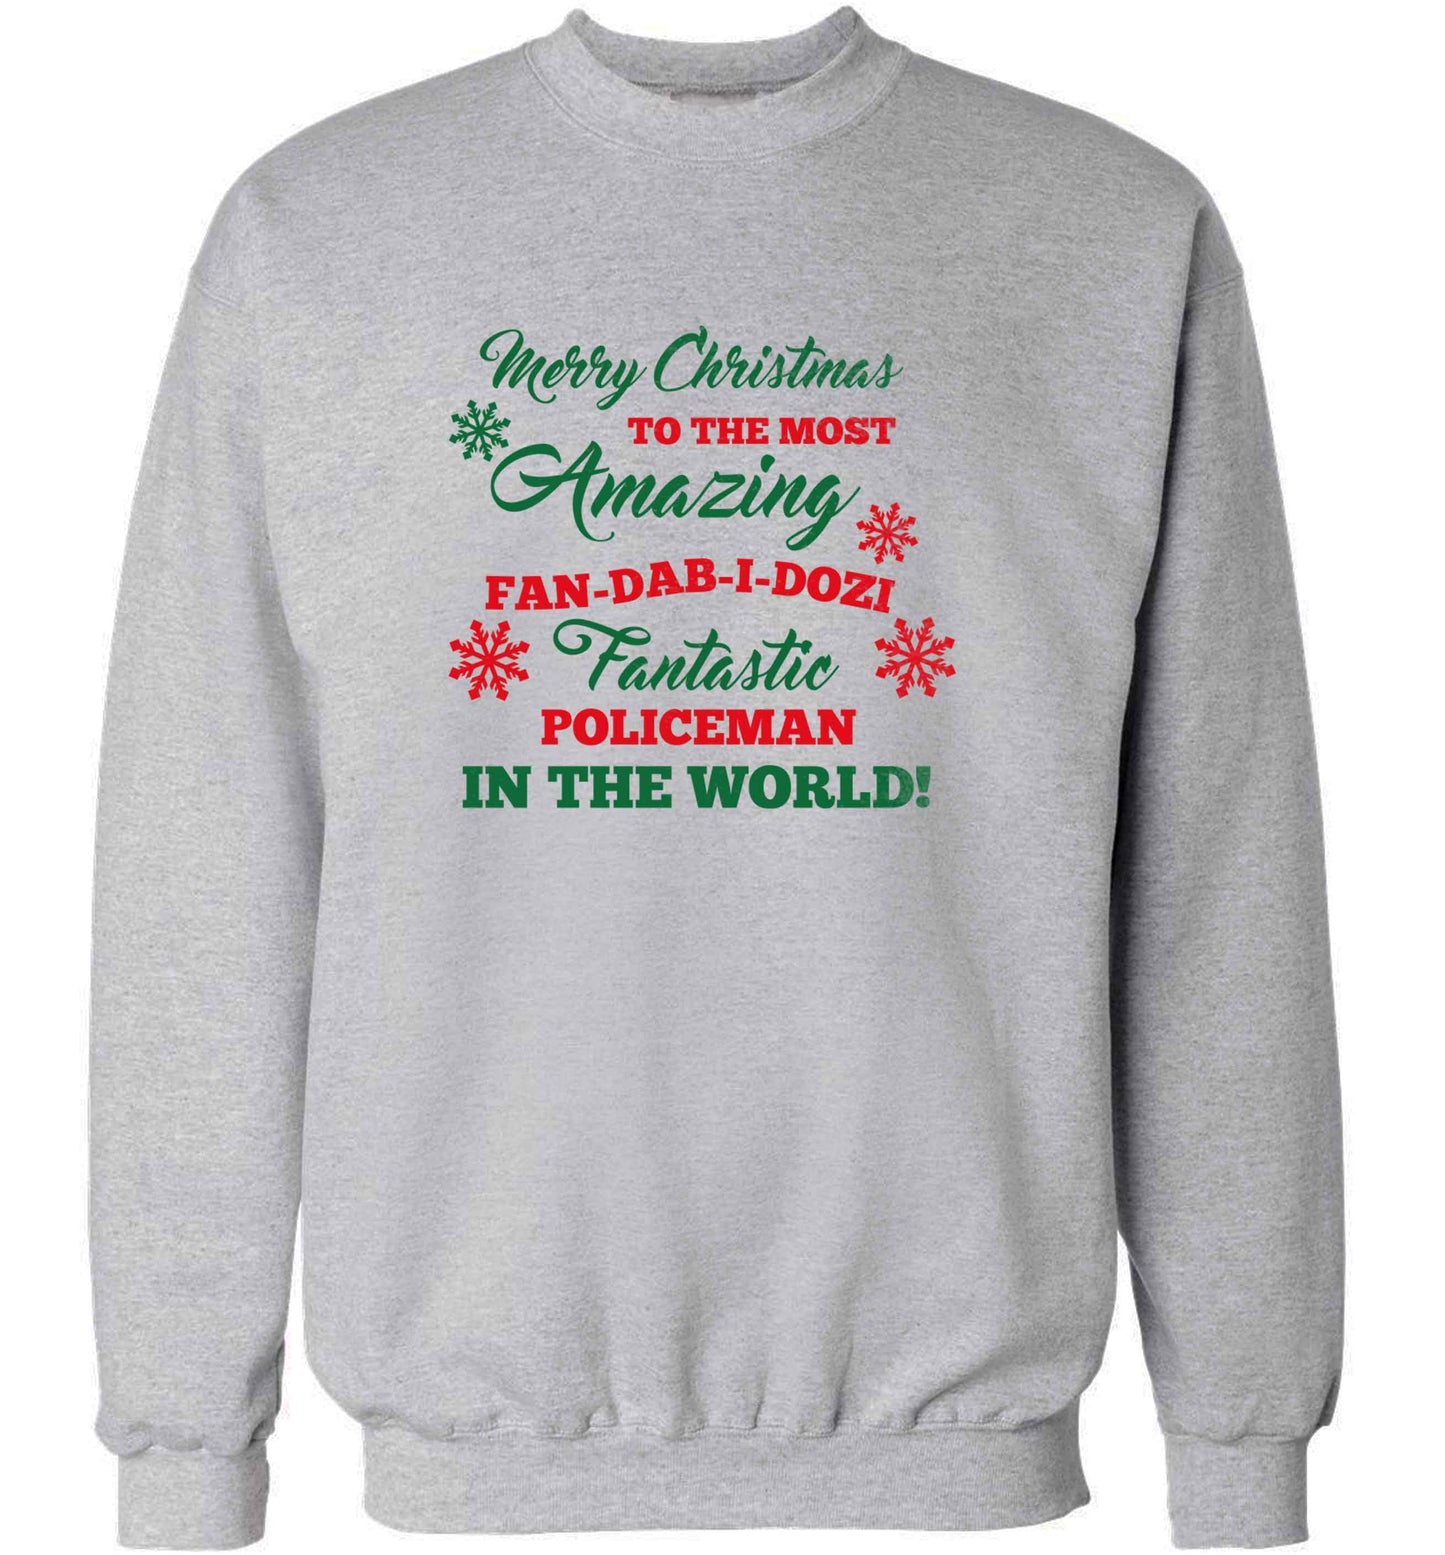 Merry Christmas to the most amazing policeman in the world! adult's unisex grey sweater 2XL